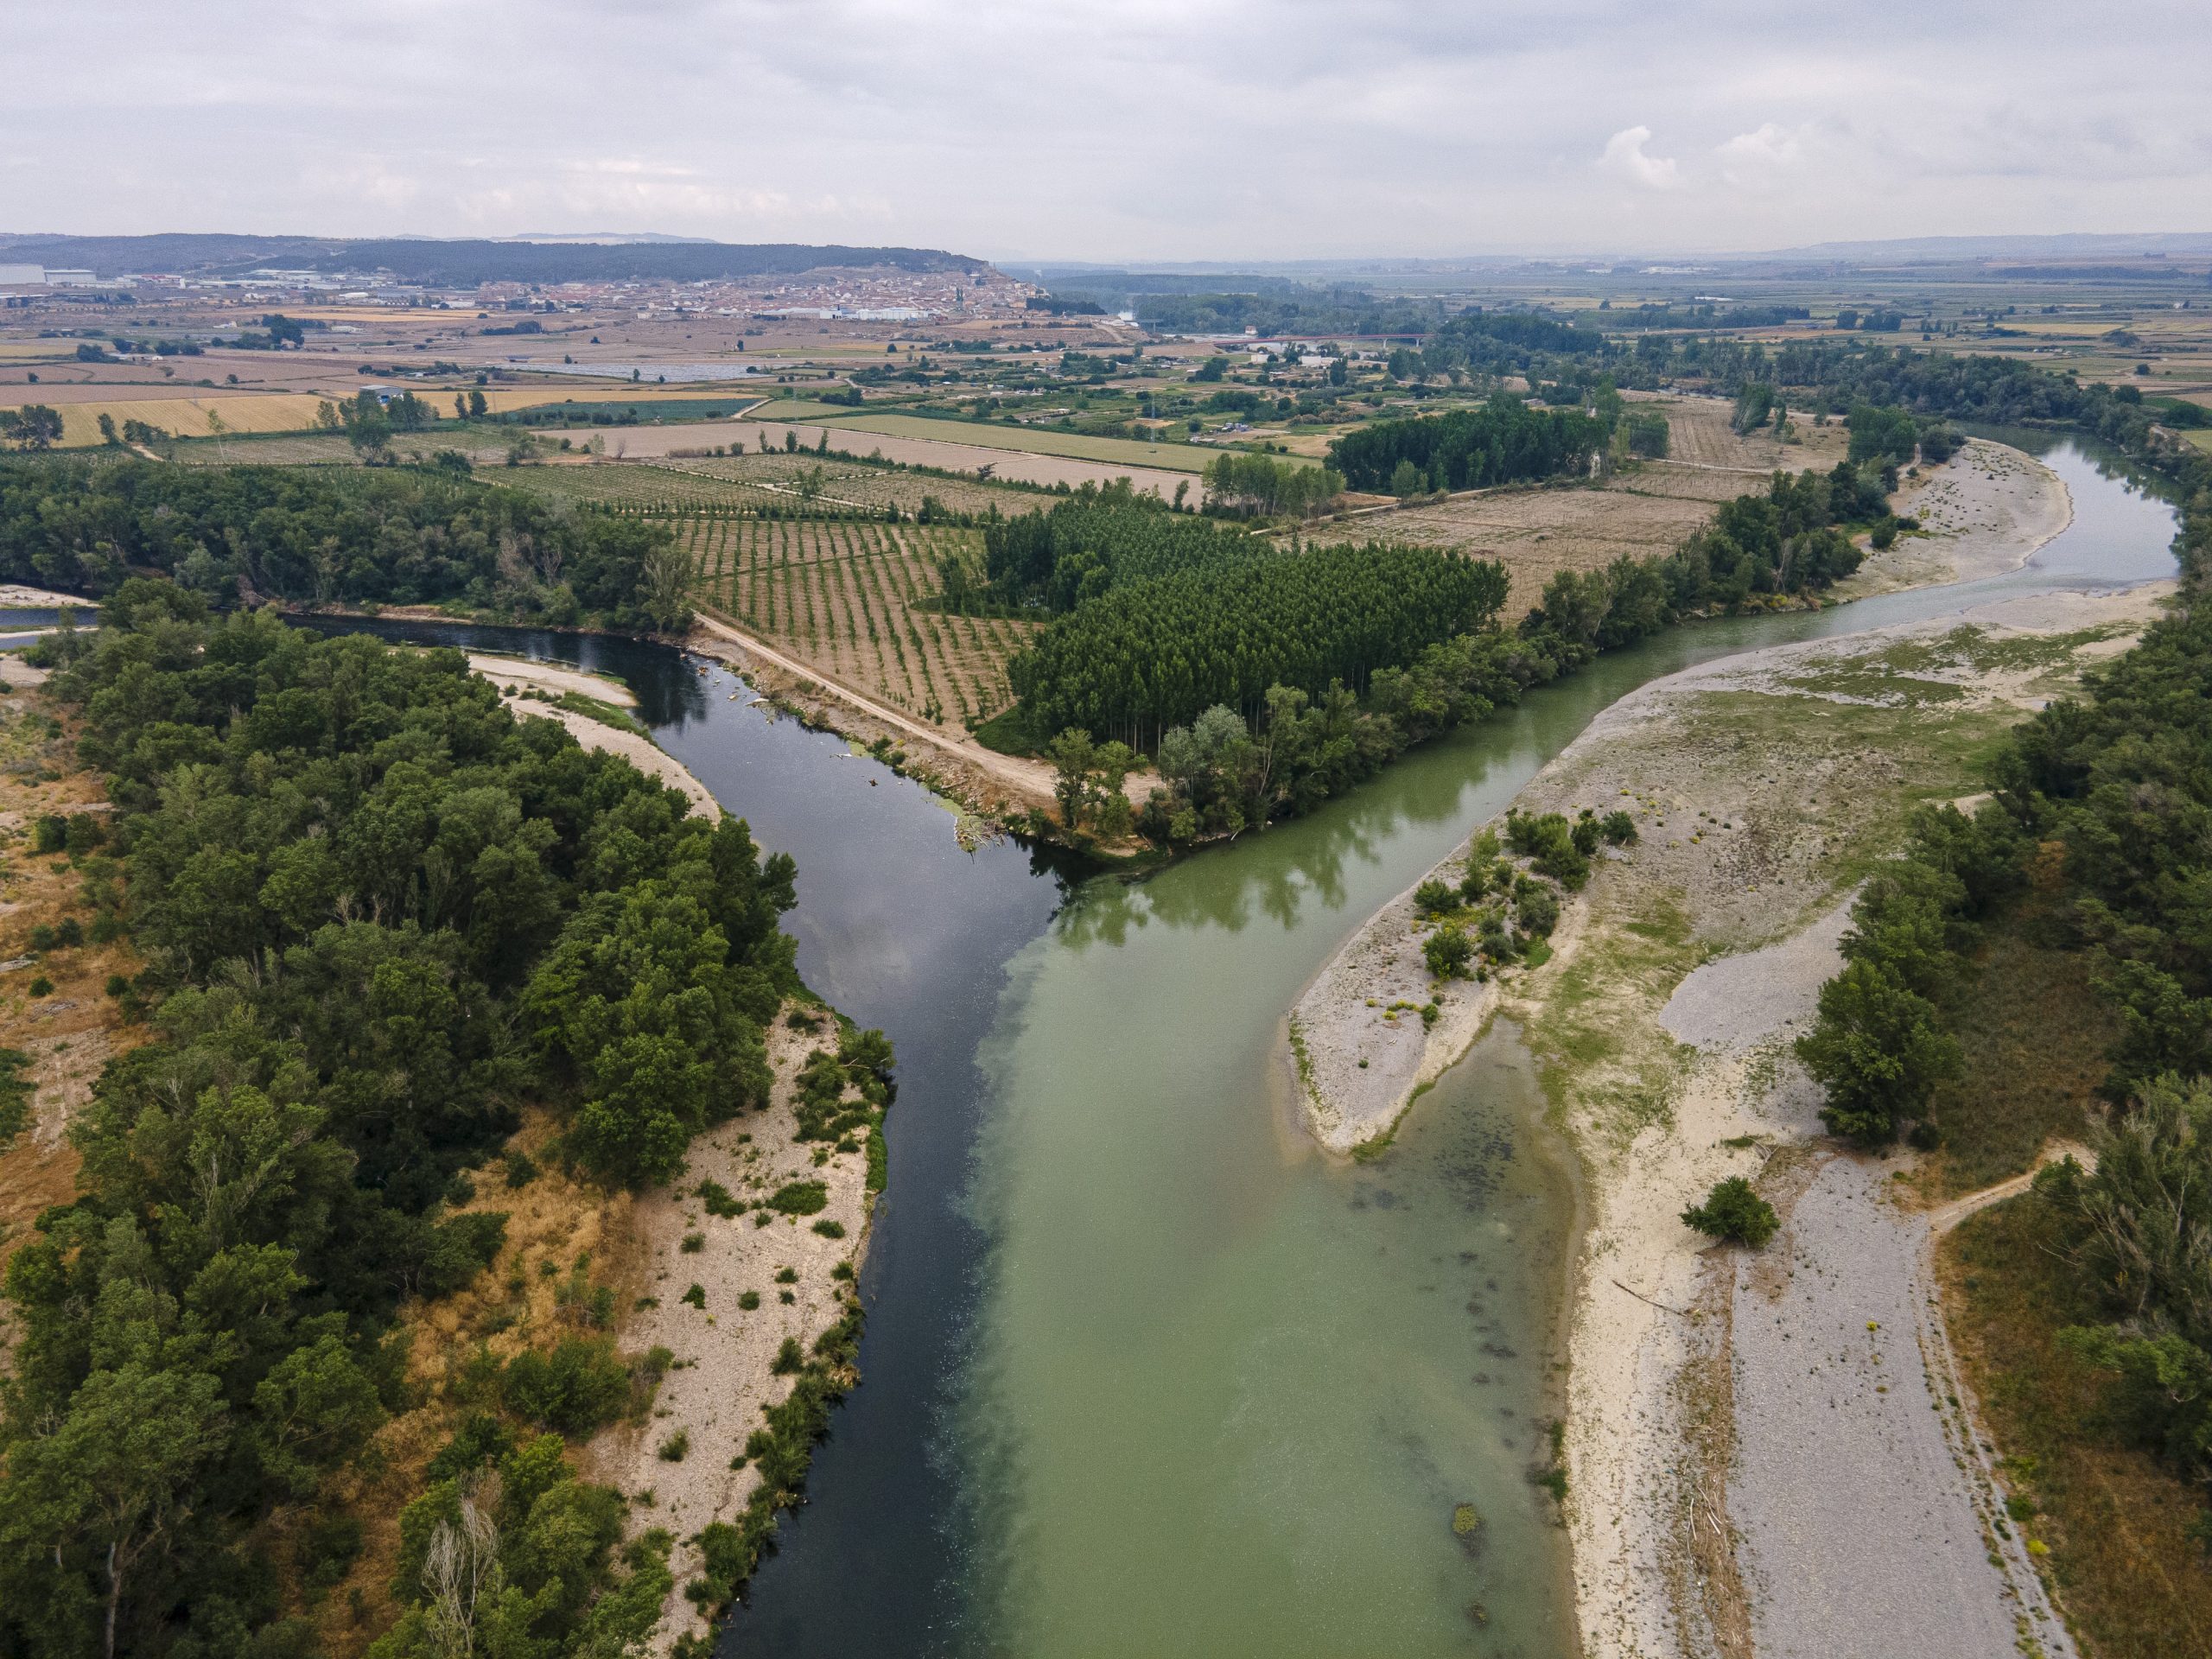 Phase 1 of the environmental restoration of the Ebro river in "El Ortigoso", Milagro (Navarra) is completed.